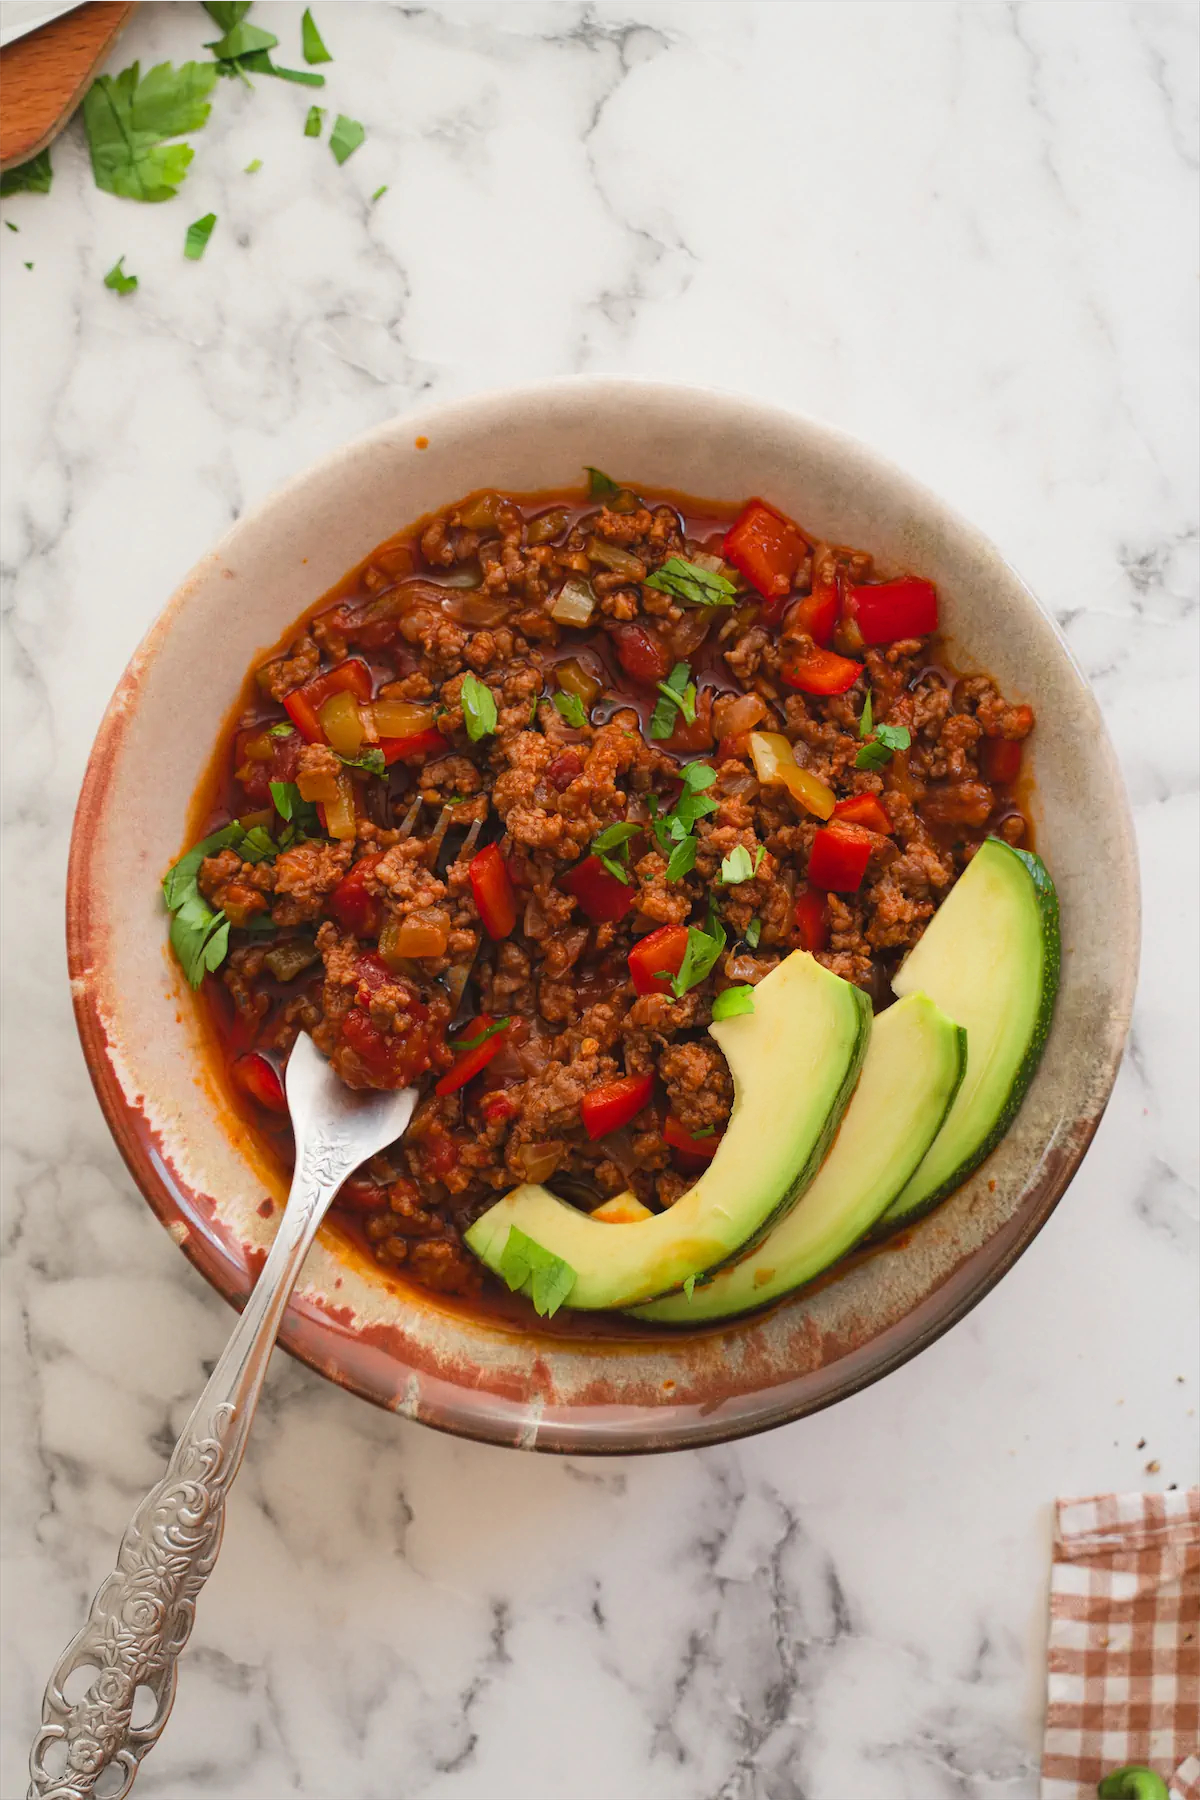 Homemade keto chili con carne served in a bowl with avocado slices and a spoon.